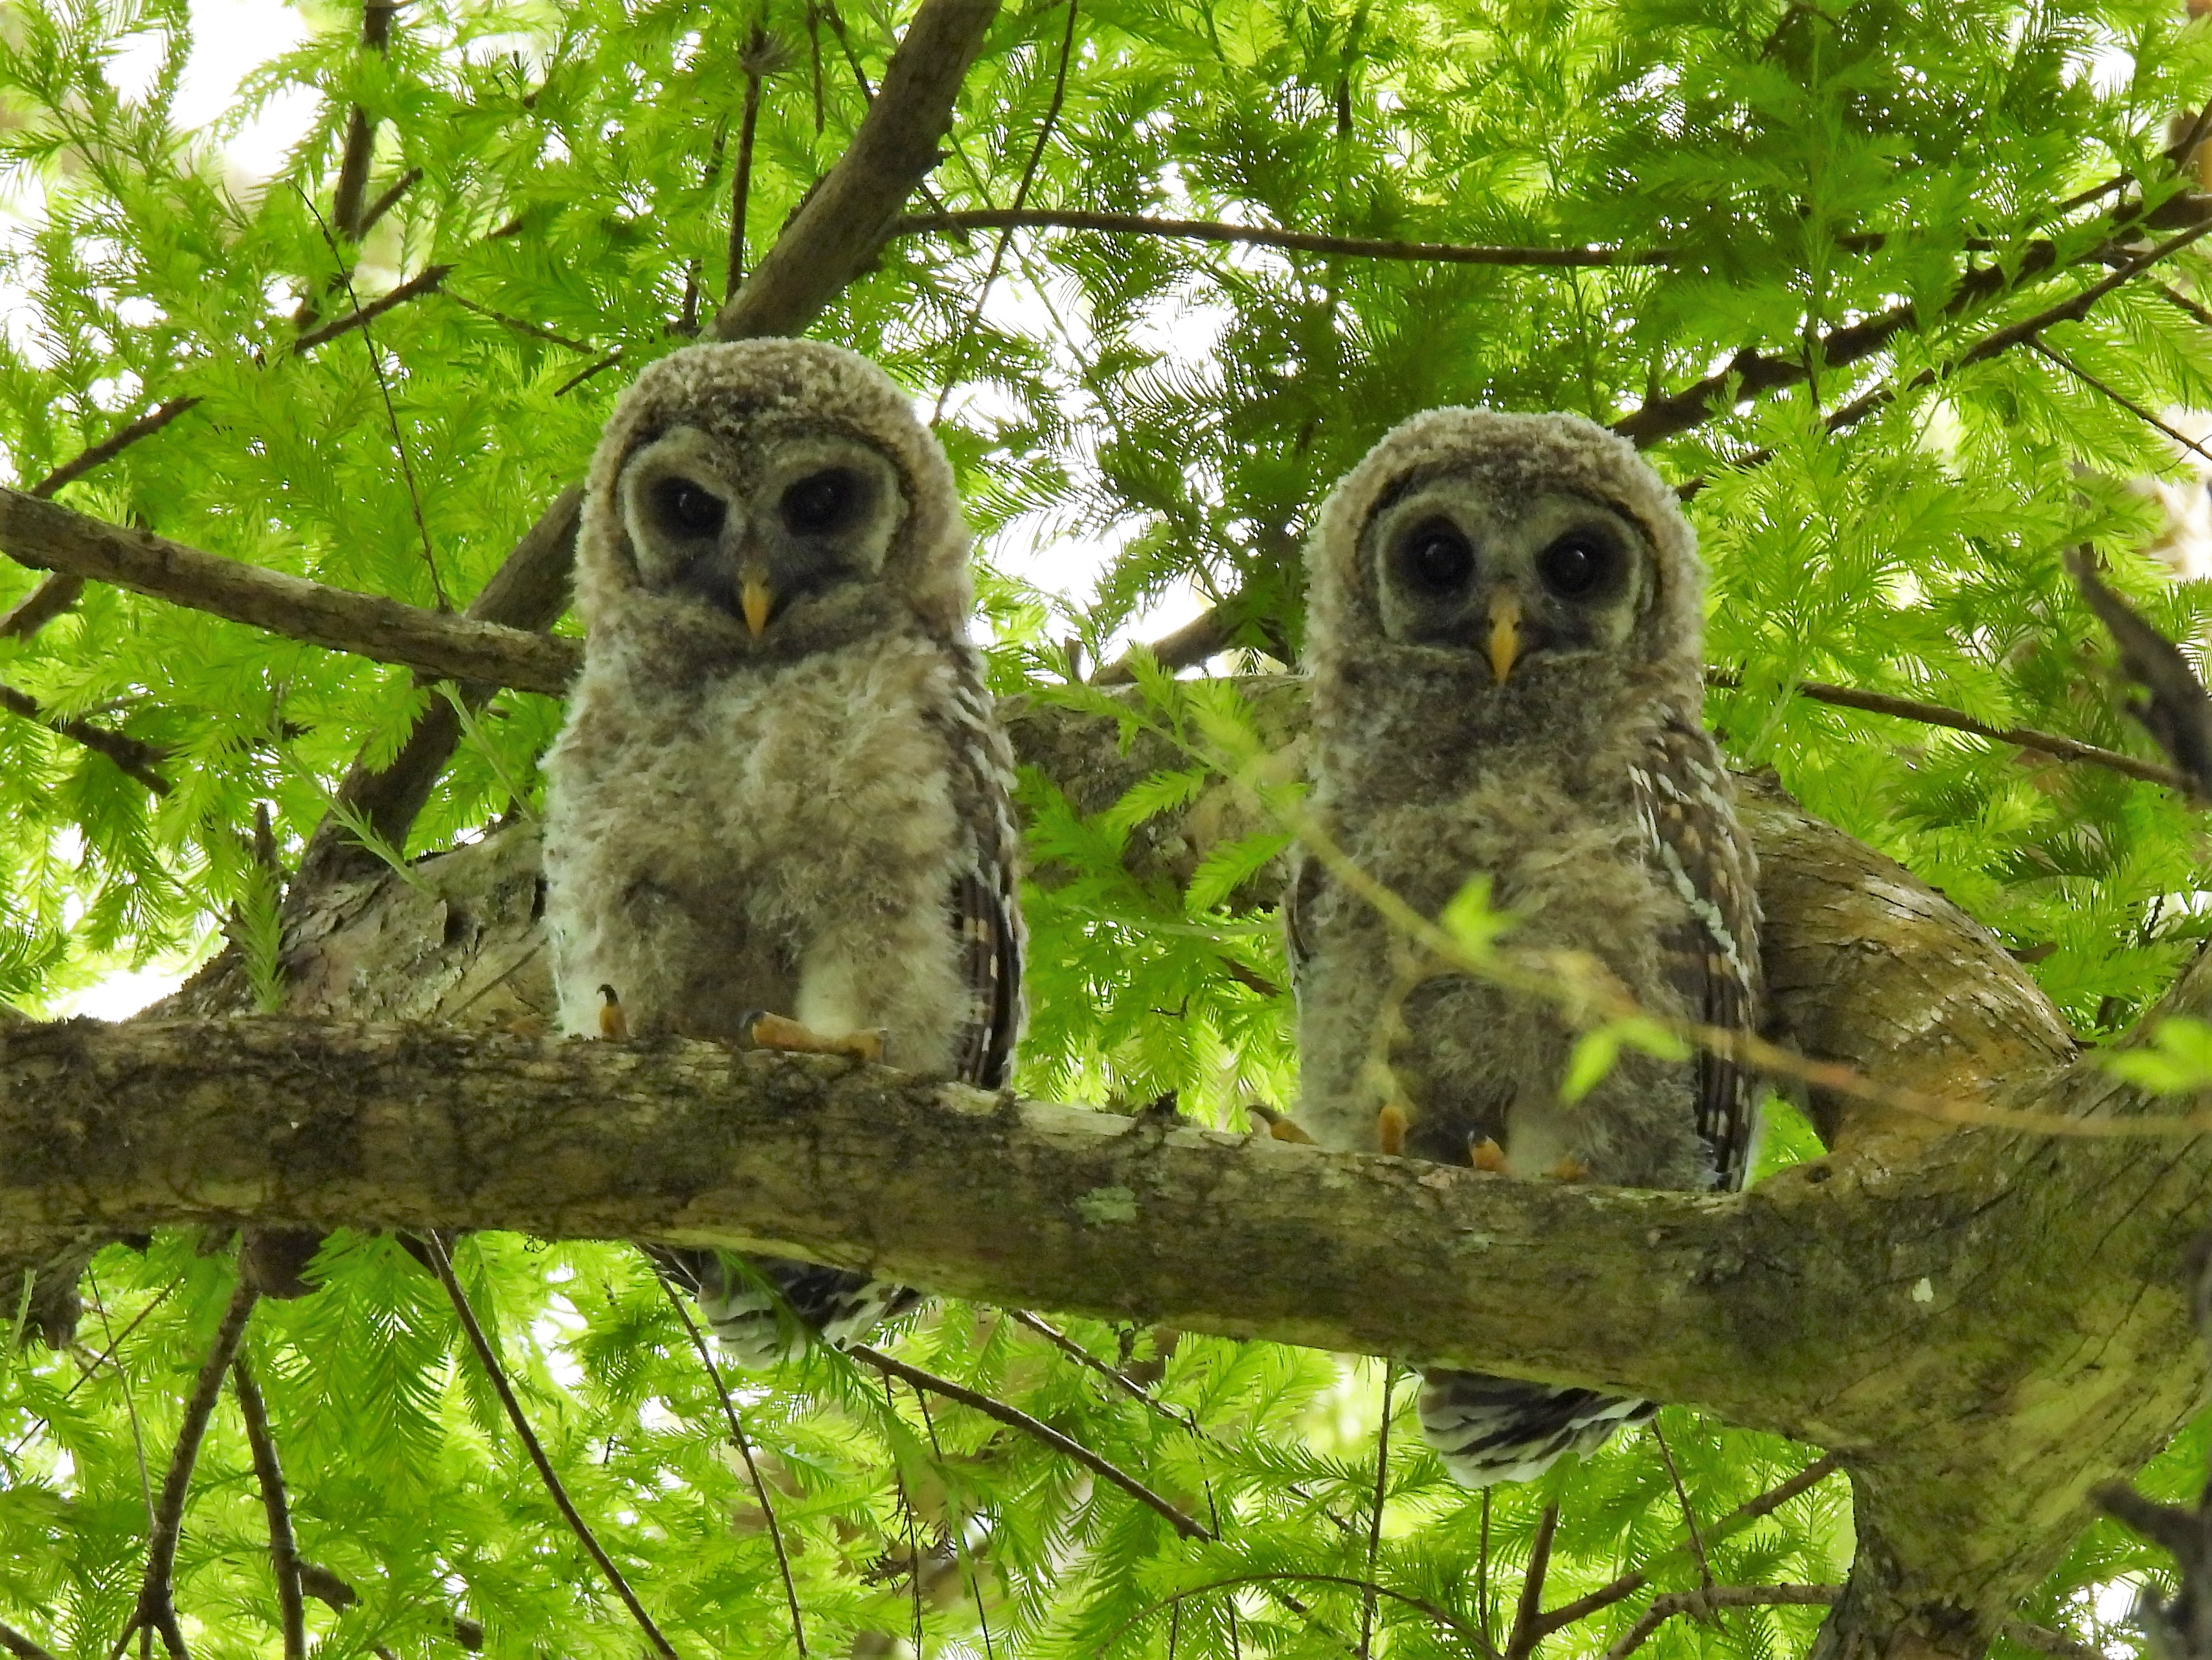 Two owlets in a treetop